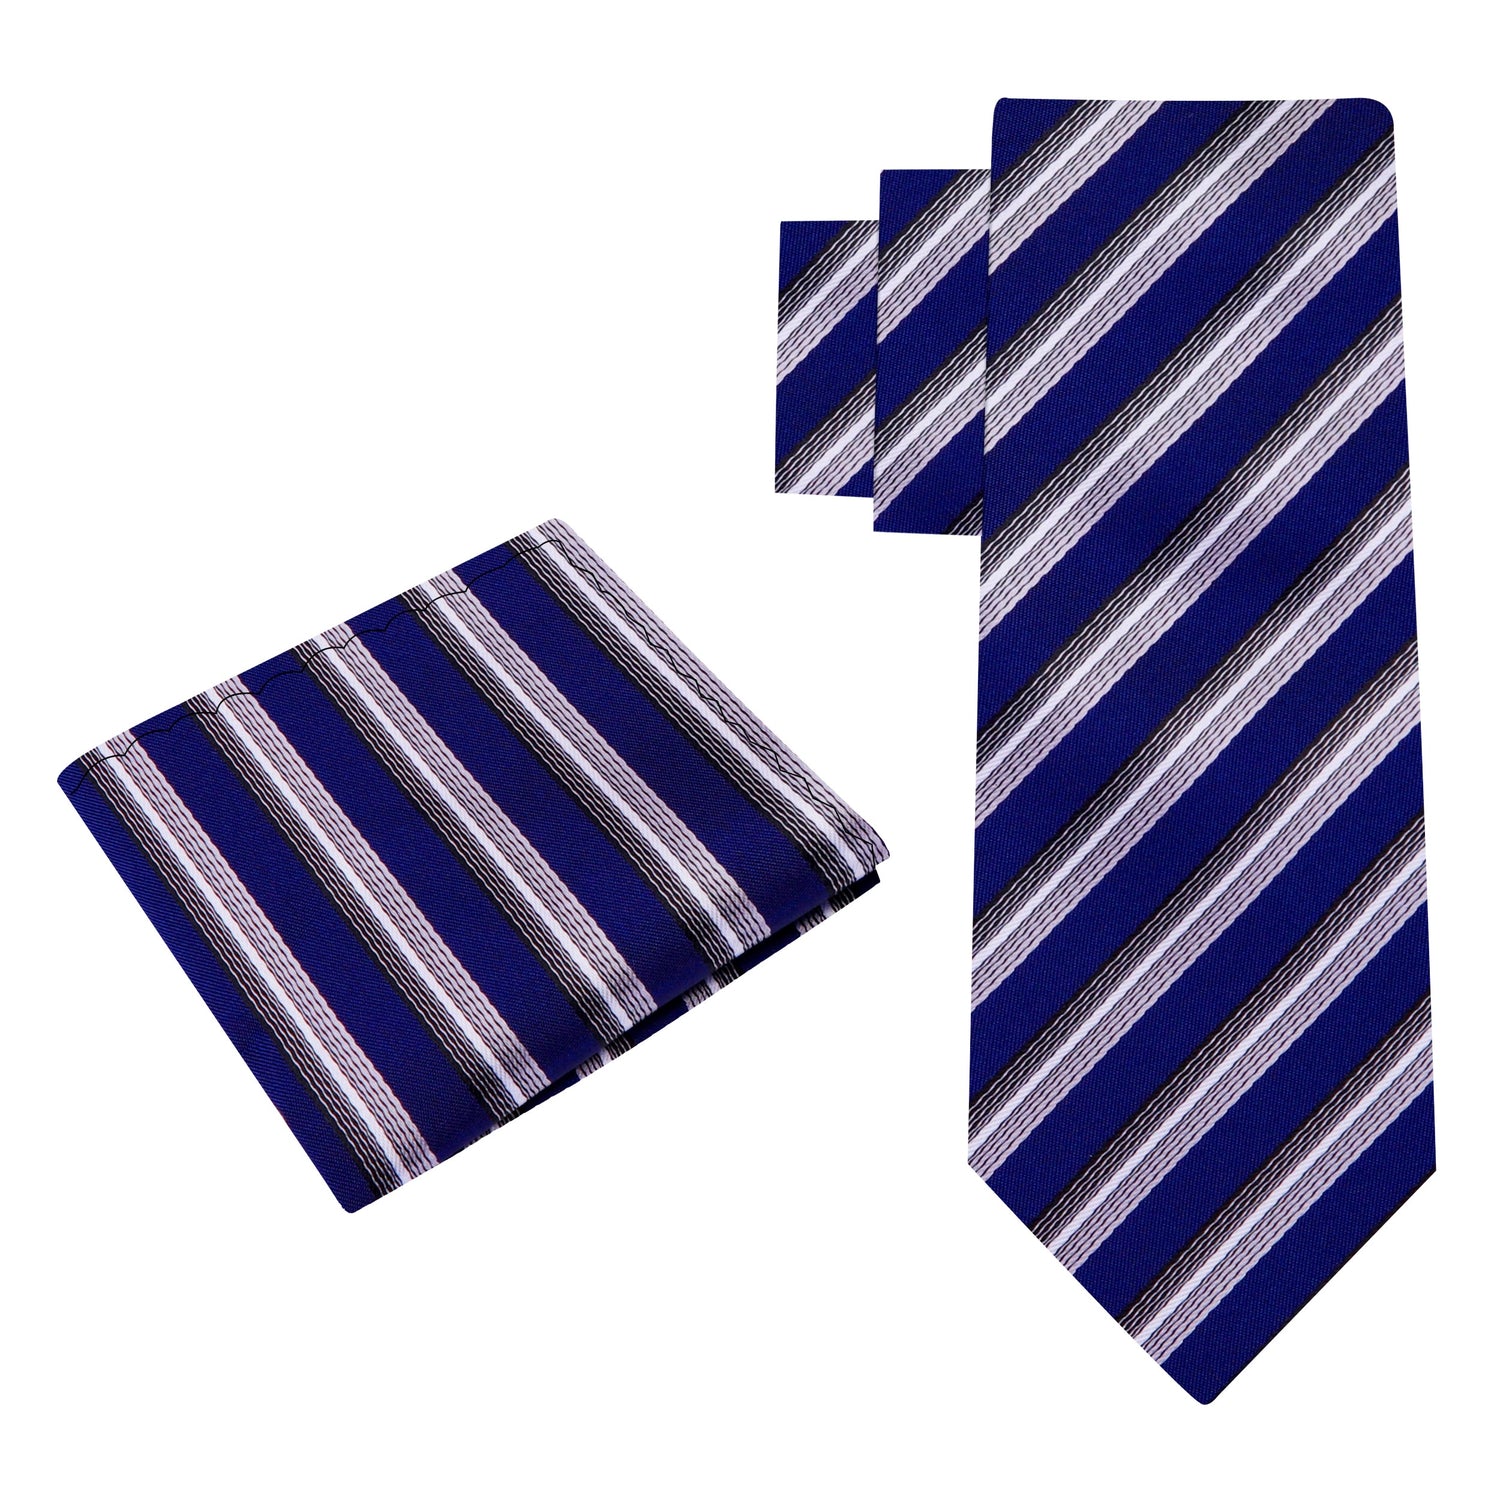 View 2 Blue, Grey Stripe Tie and Pocket Square